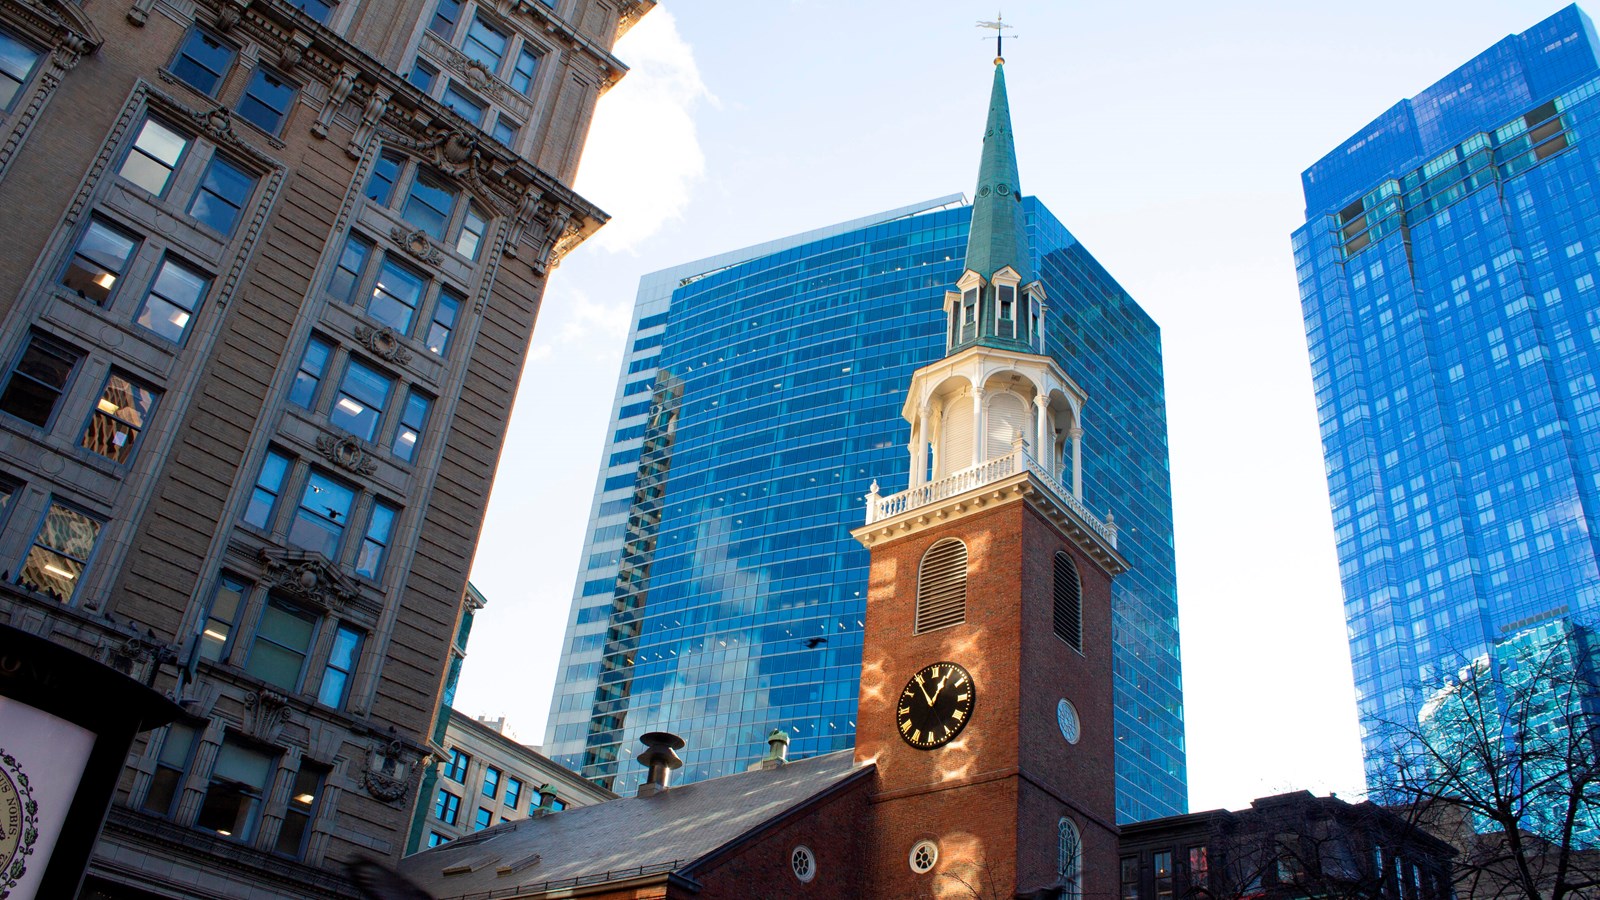 Photo looking up at the tall brick and copper steeple of Old South Meeting House